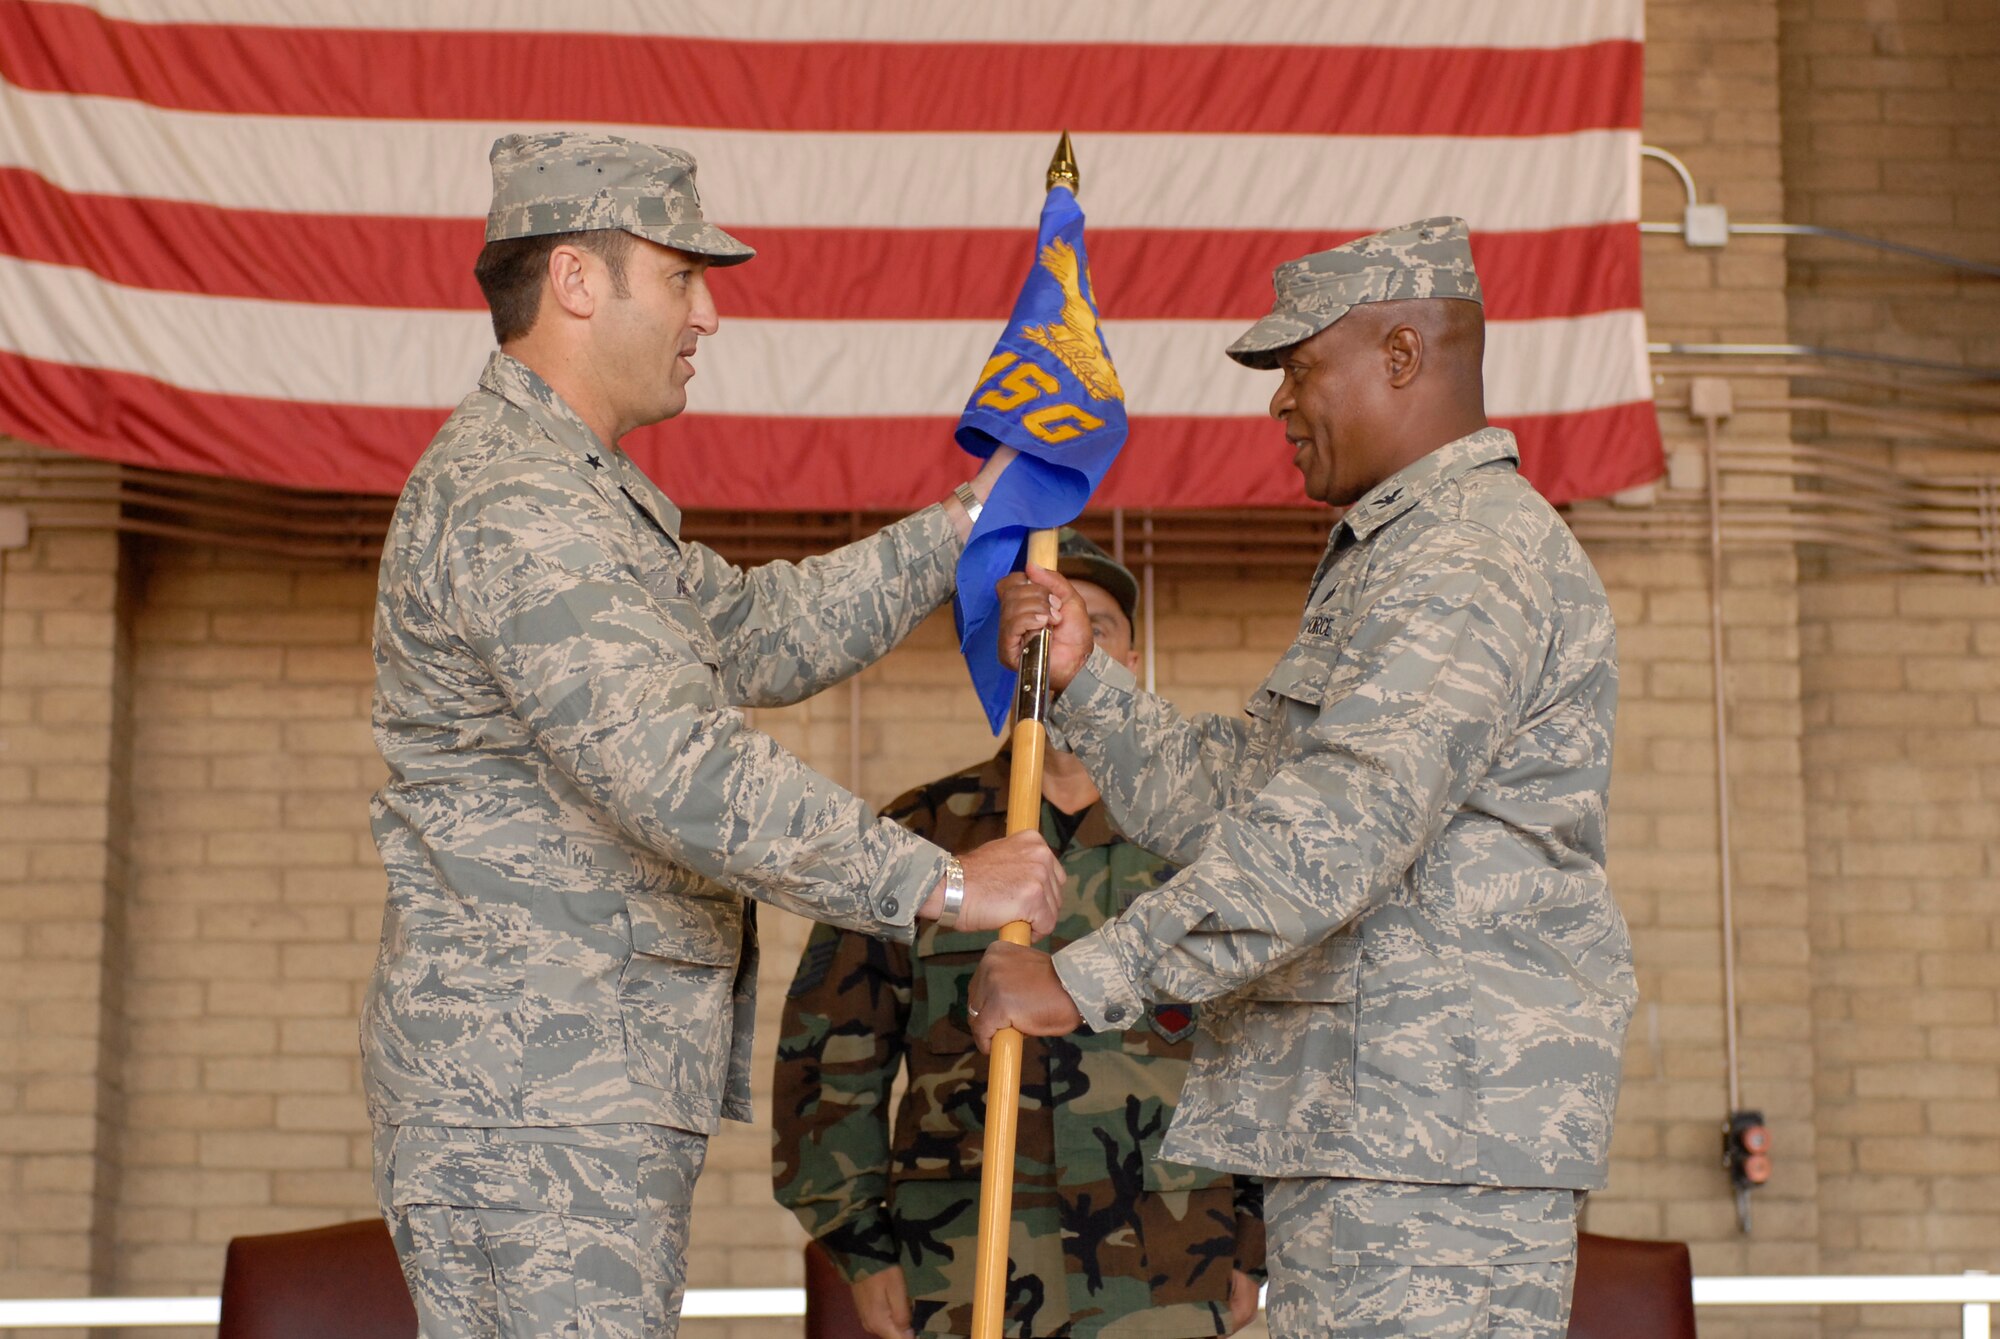 Brig. Gen. Tom Jones, 56th FW/CC, officiated the 56th MSG change of command ceremony where Col. Andre Curry took command from Col. Ronald Mozzillo, May 2.